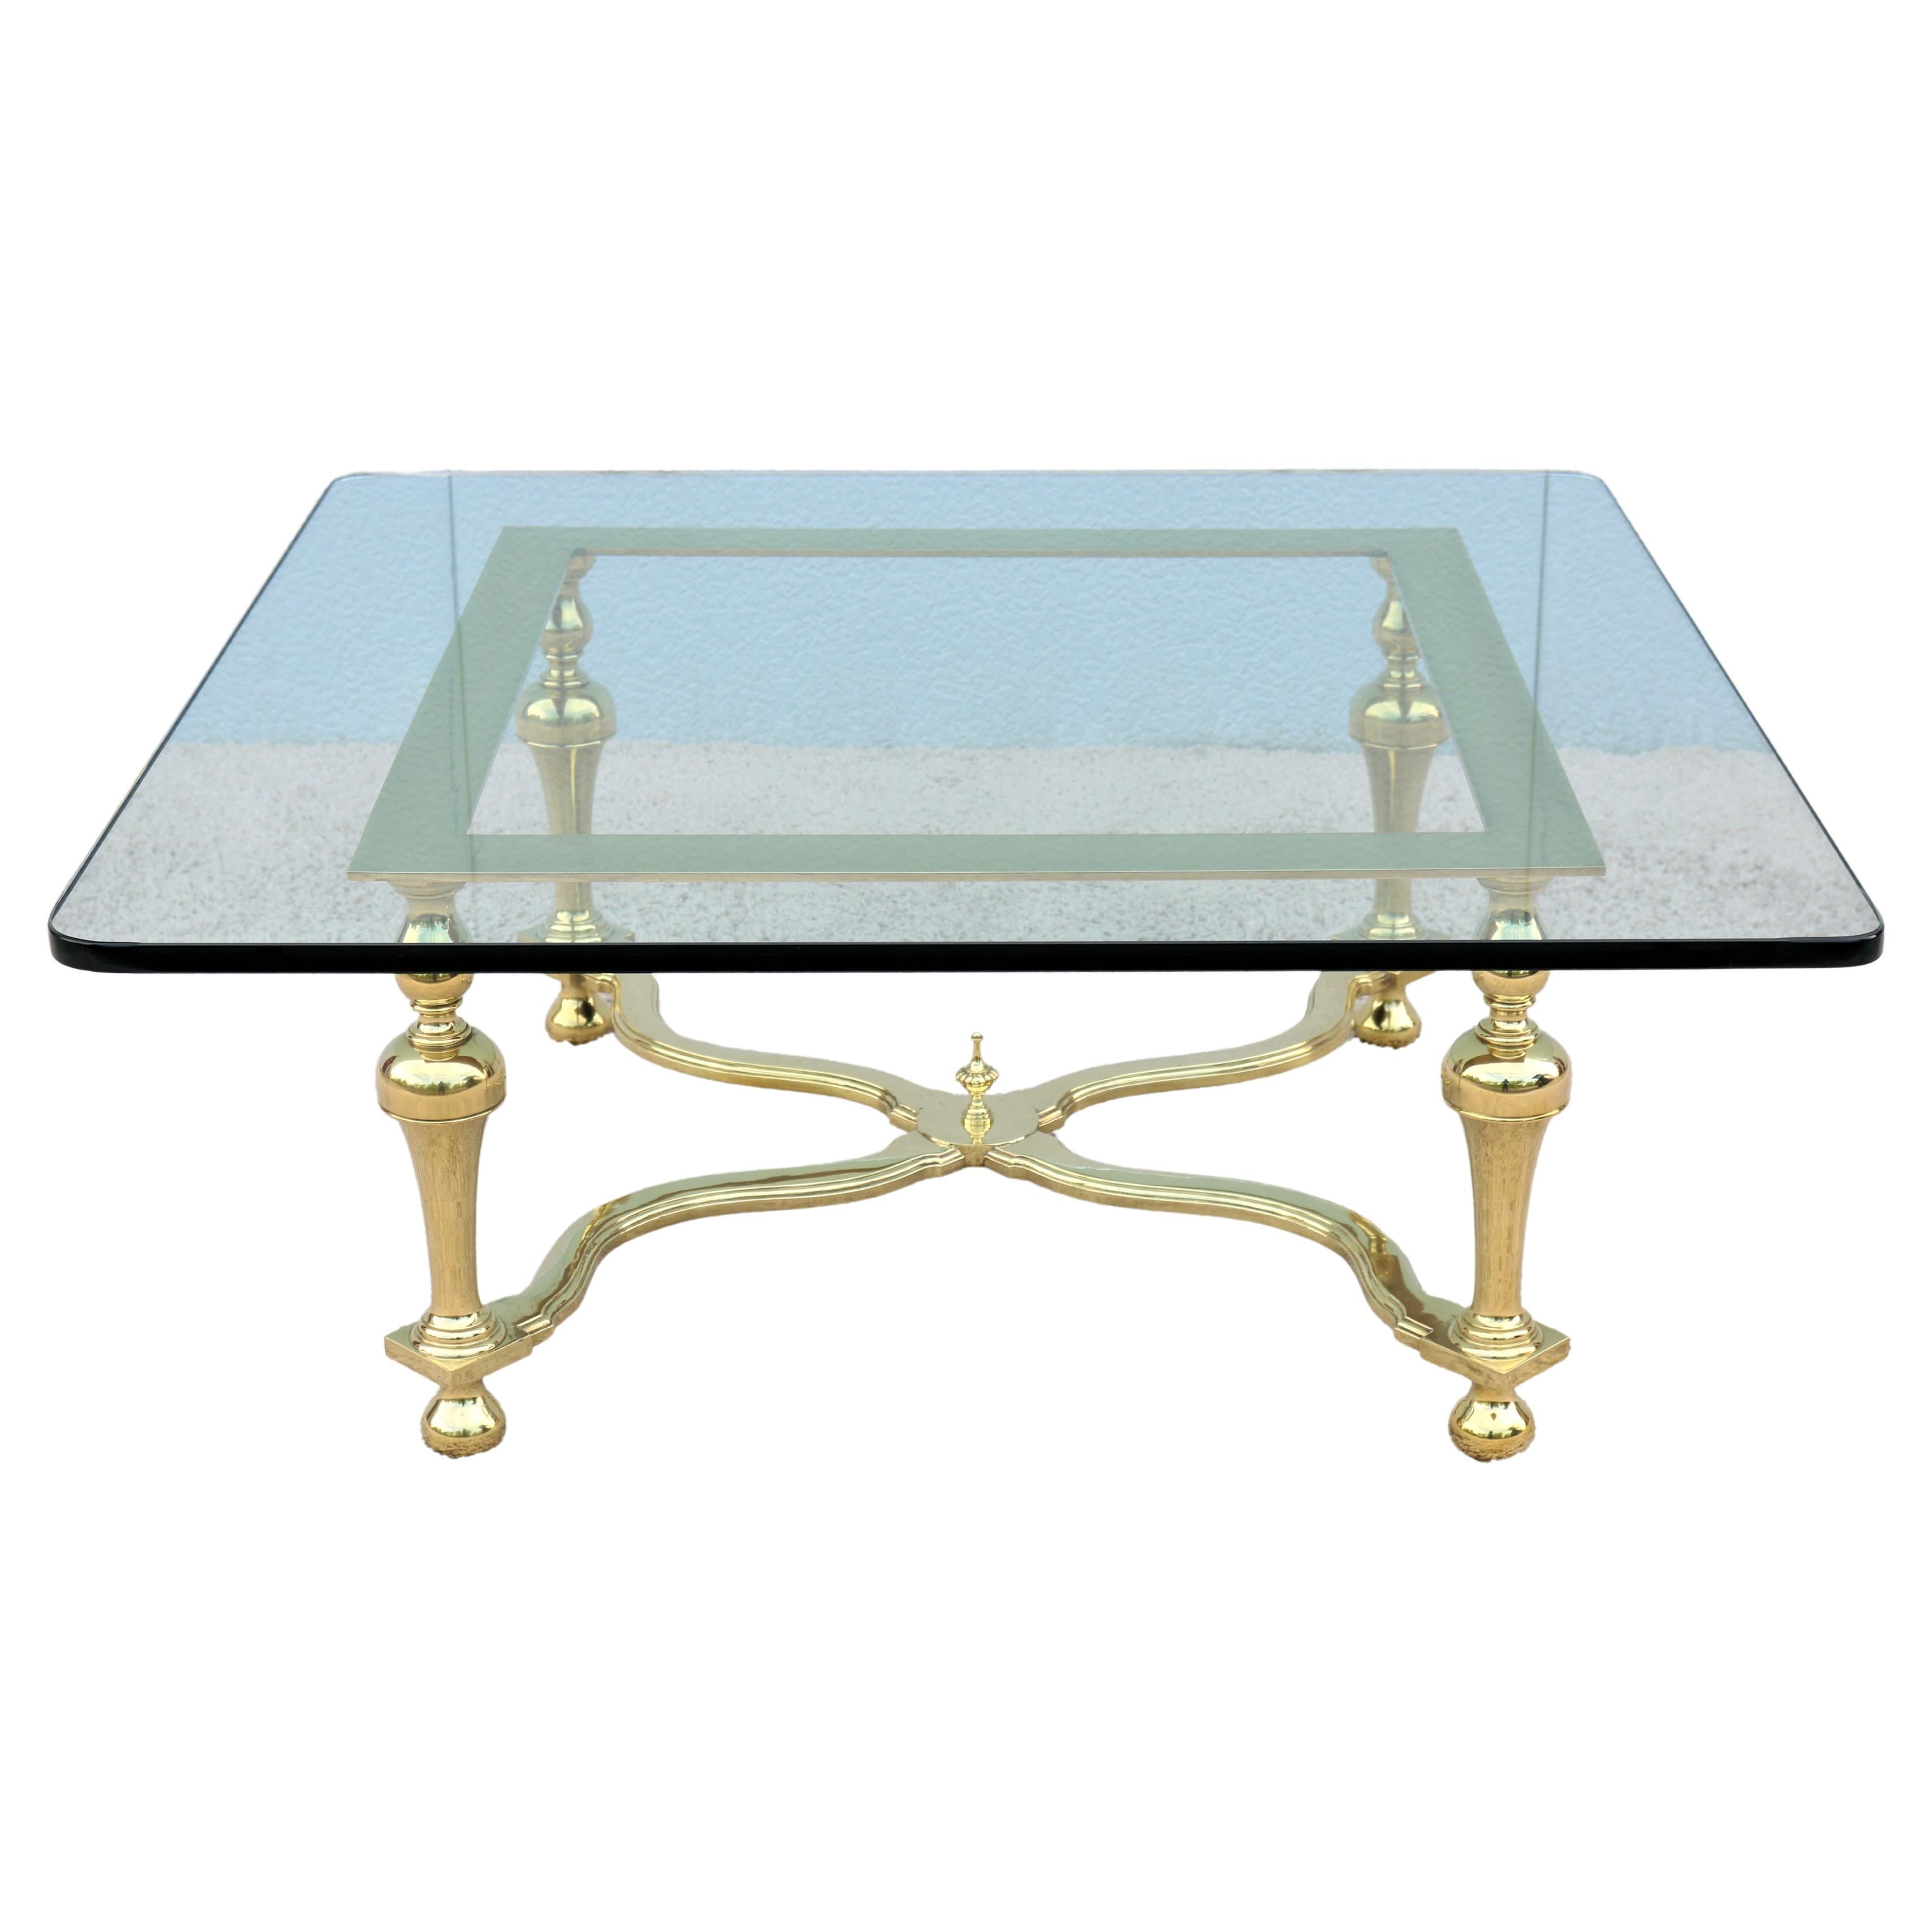 1970s Hollywood Regency Maison Jansen Style Brass and Glass Square Coffee Table